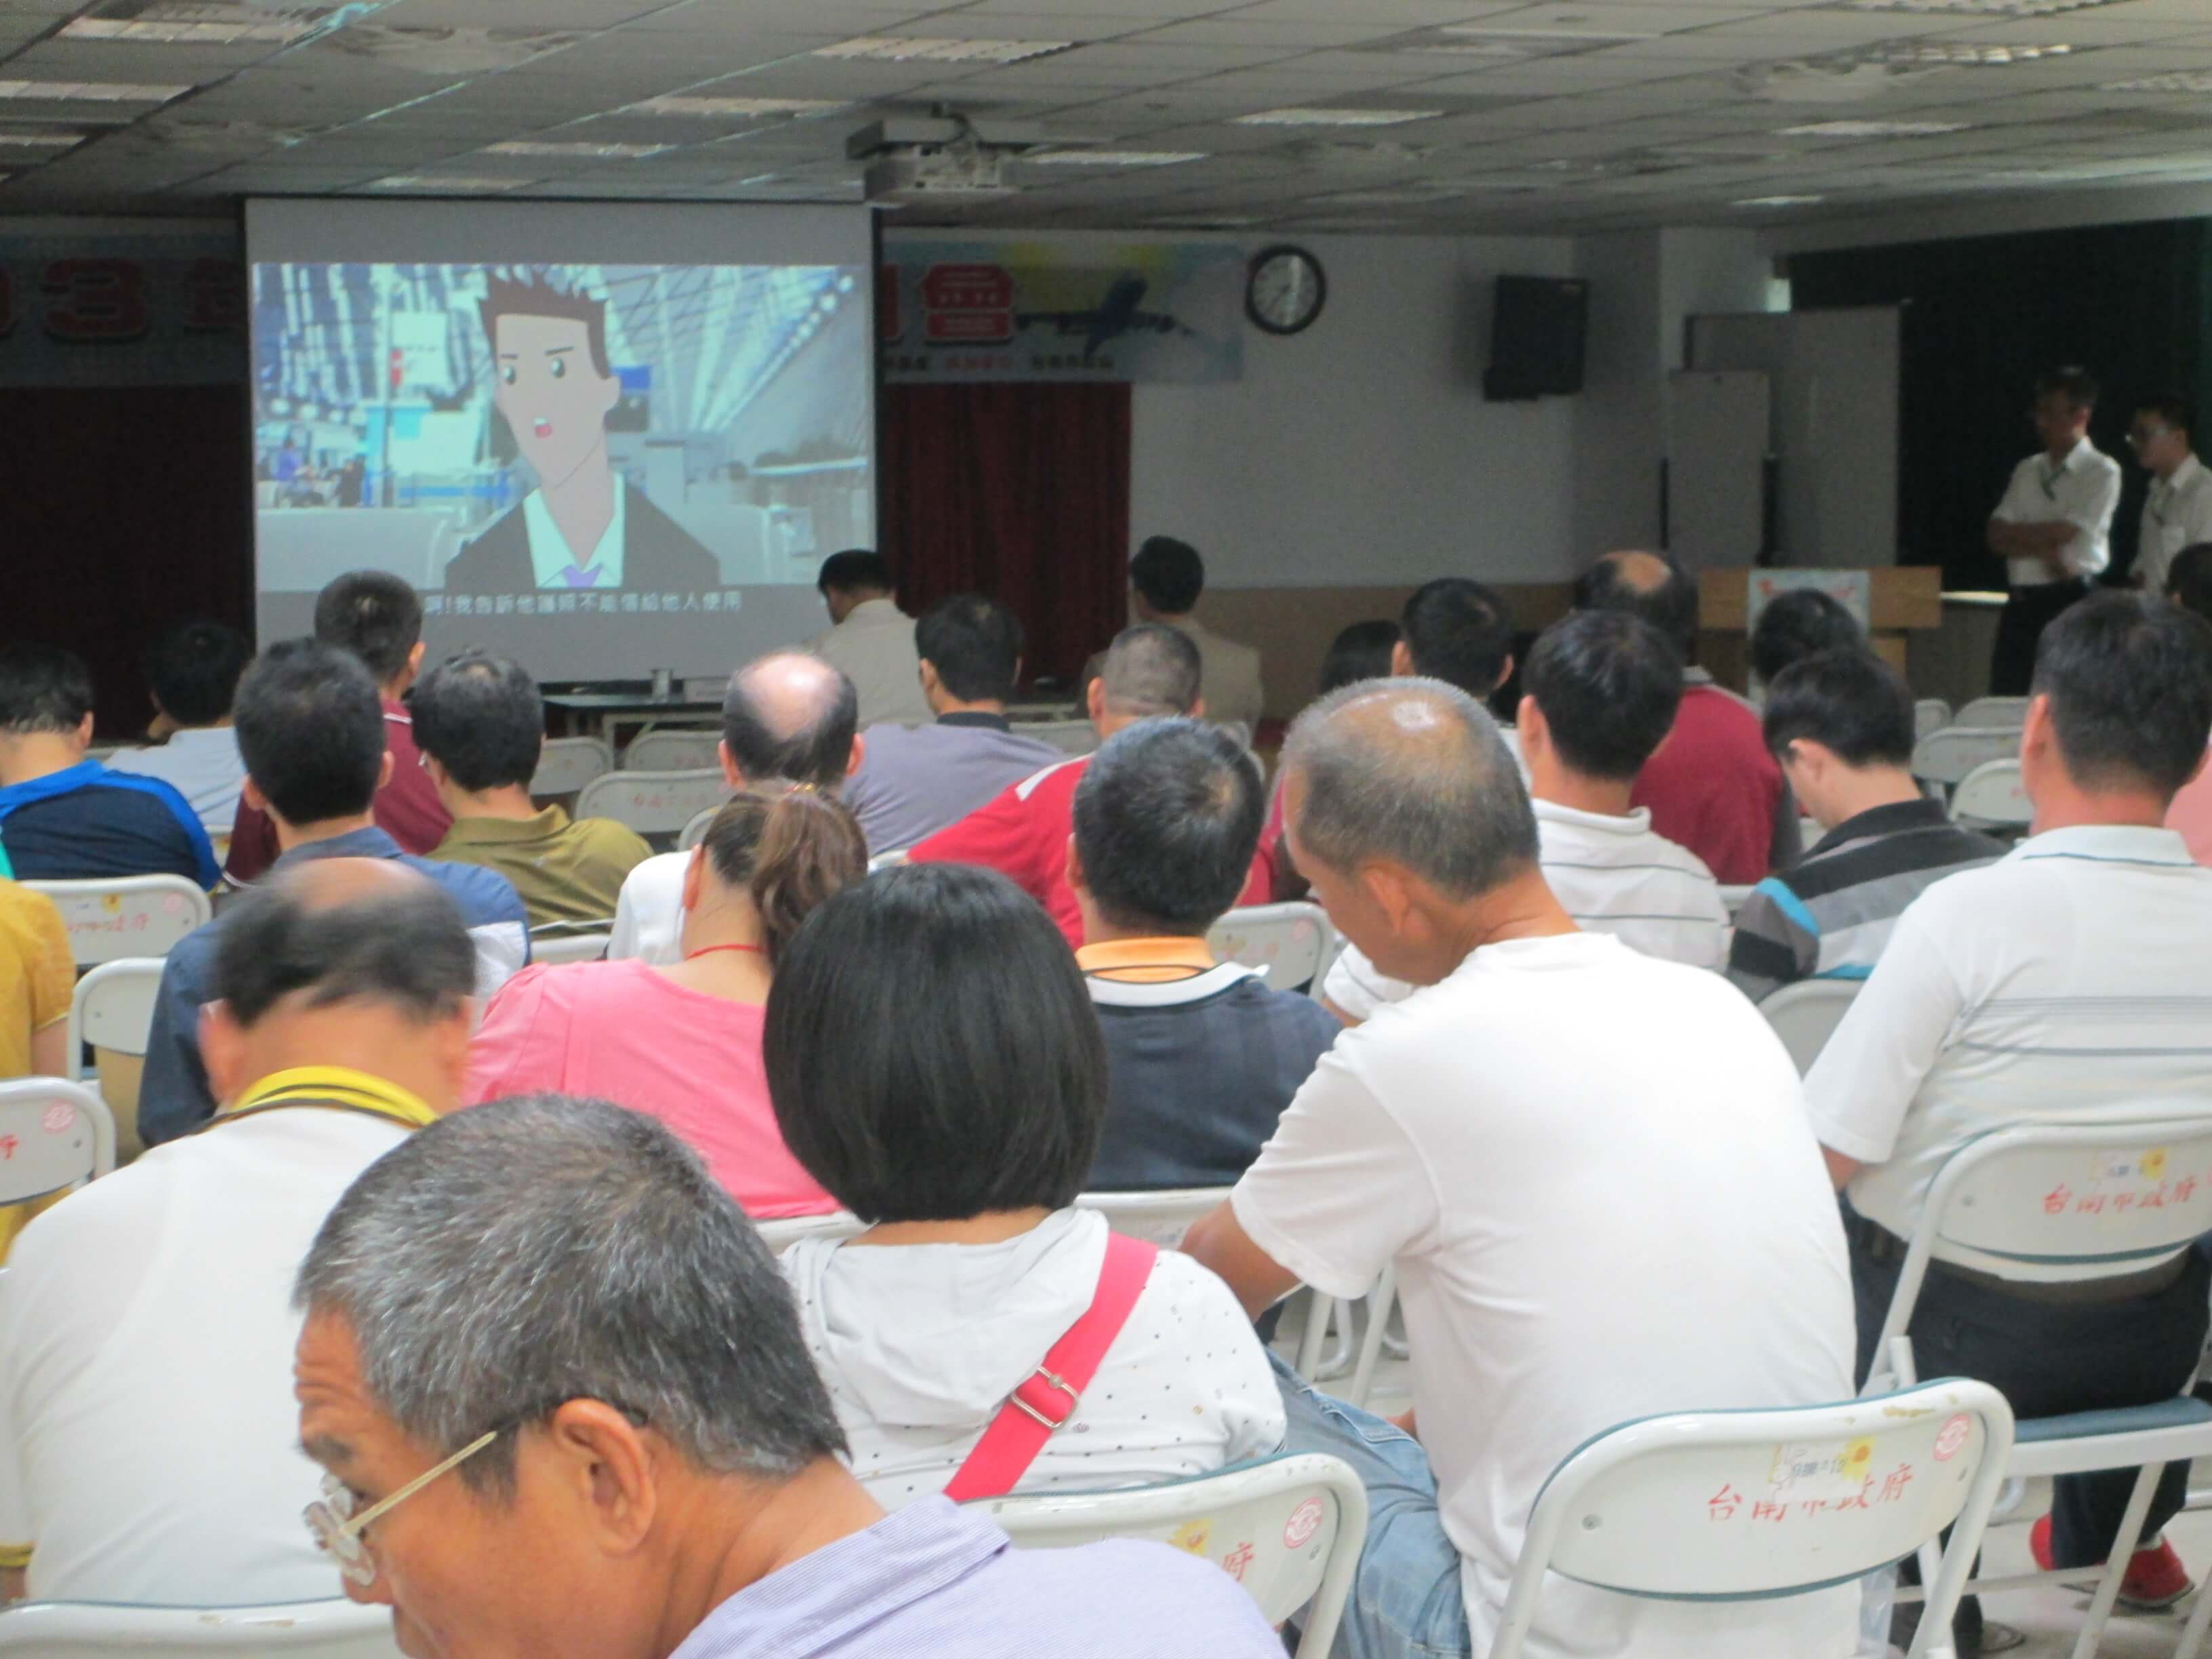 Southwestern Taiwan Office, MOFA Held a Consular Affairs Briefing for Local Community in Tainan City on September 16, 2014